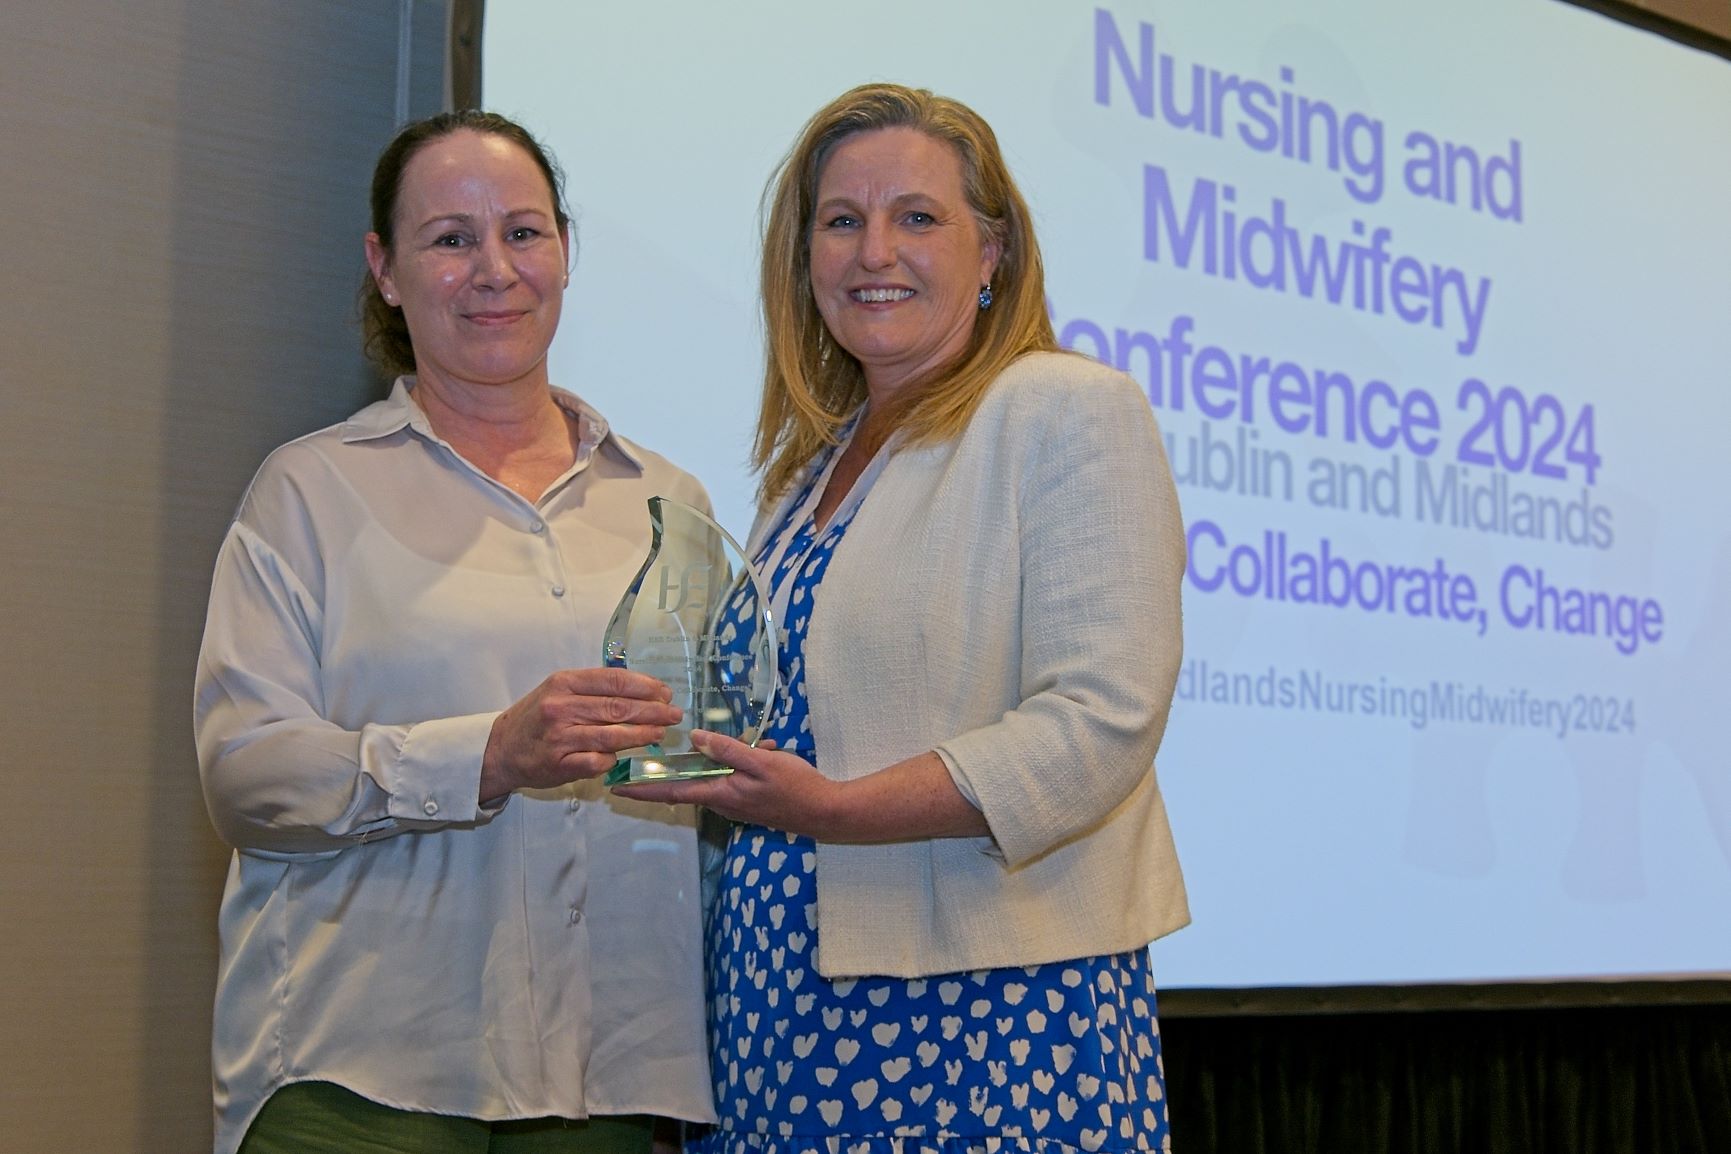 HSE-Dublin-and-Midlands-Nursing-and-Midwifery-Conference-7-websize